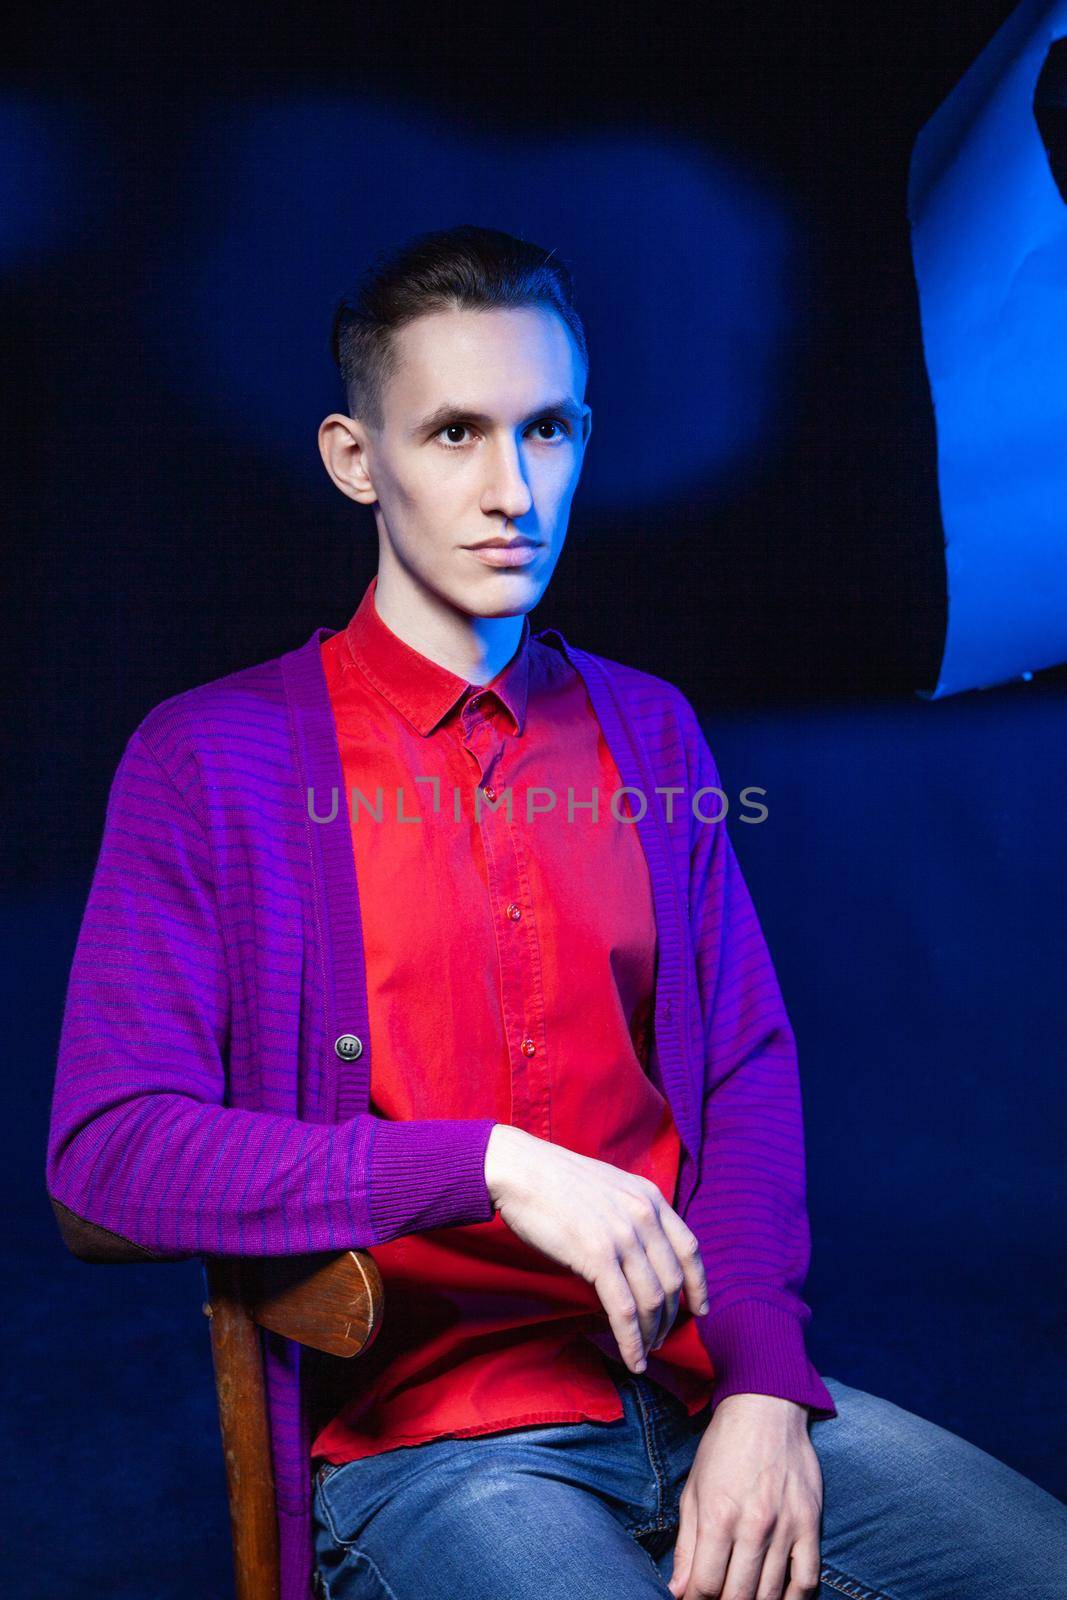 Young male in bright red shirt and purple blouse looking away while sitting on chair in dark studio with black and blue wall and shadow